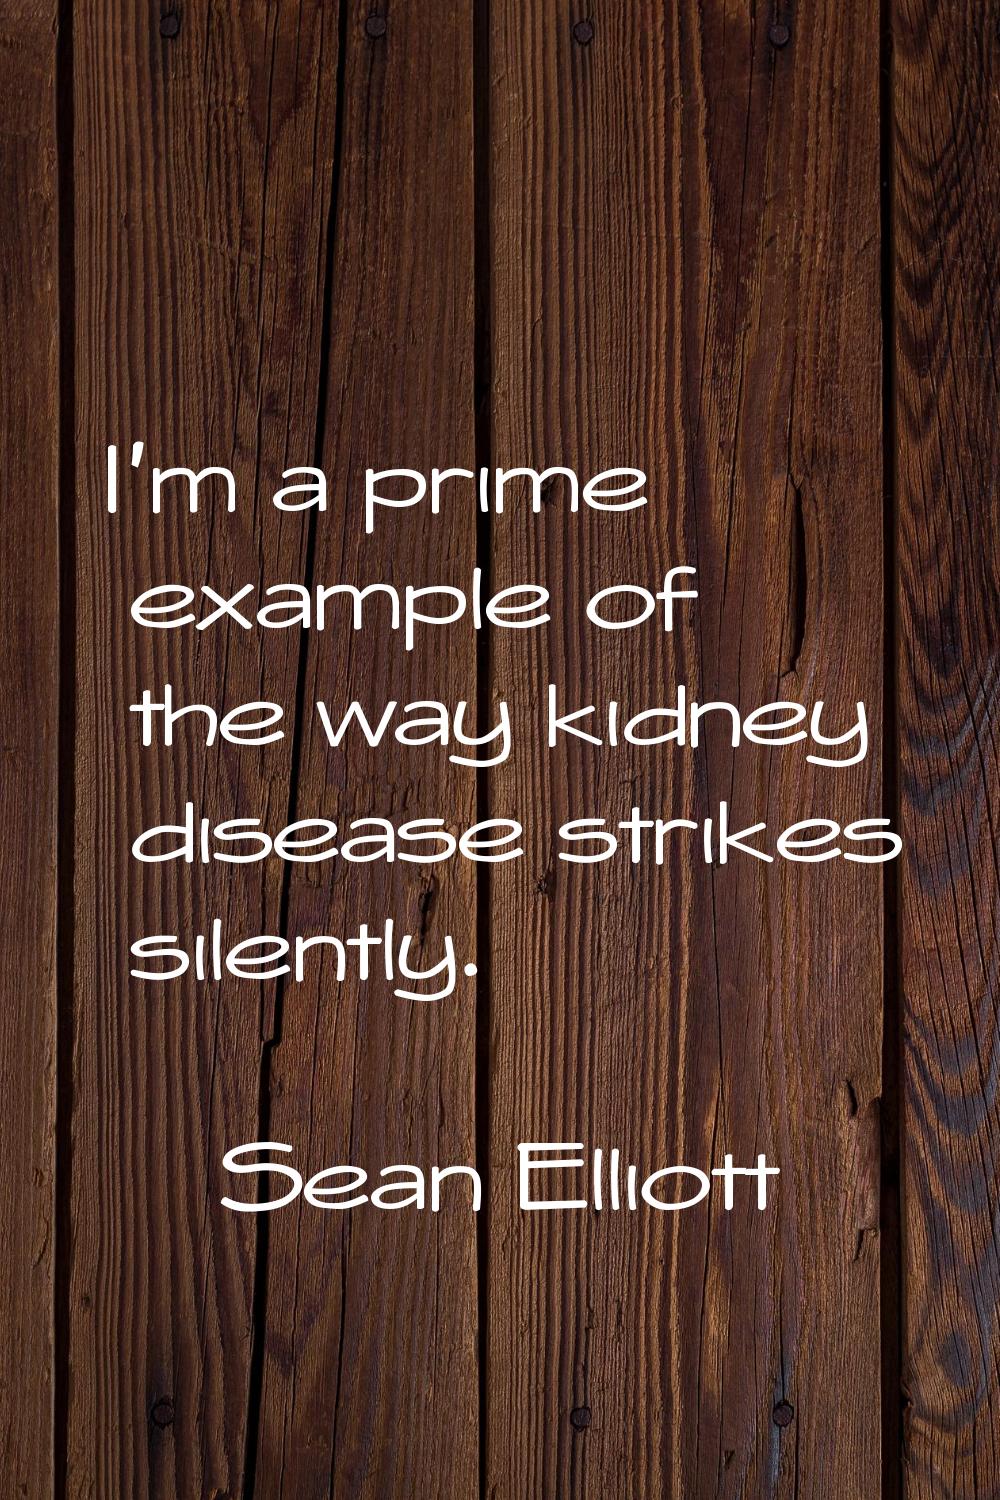 I'm a prime example of the way kidney disease strikes silently.